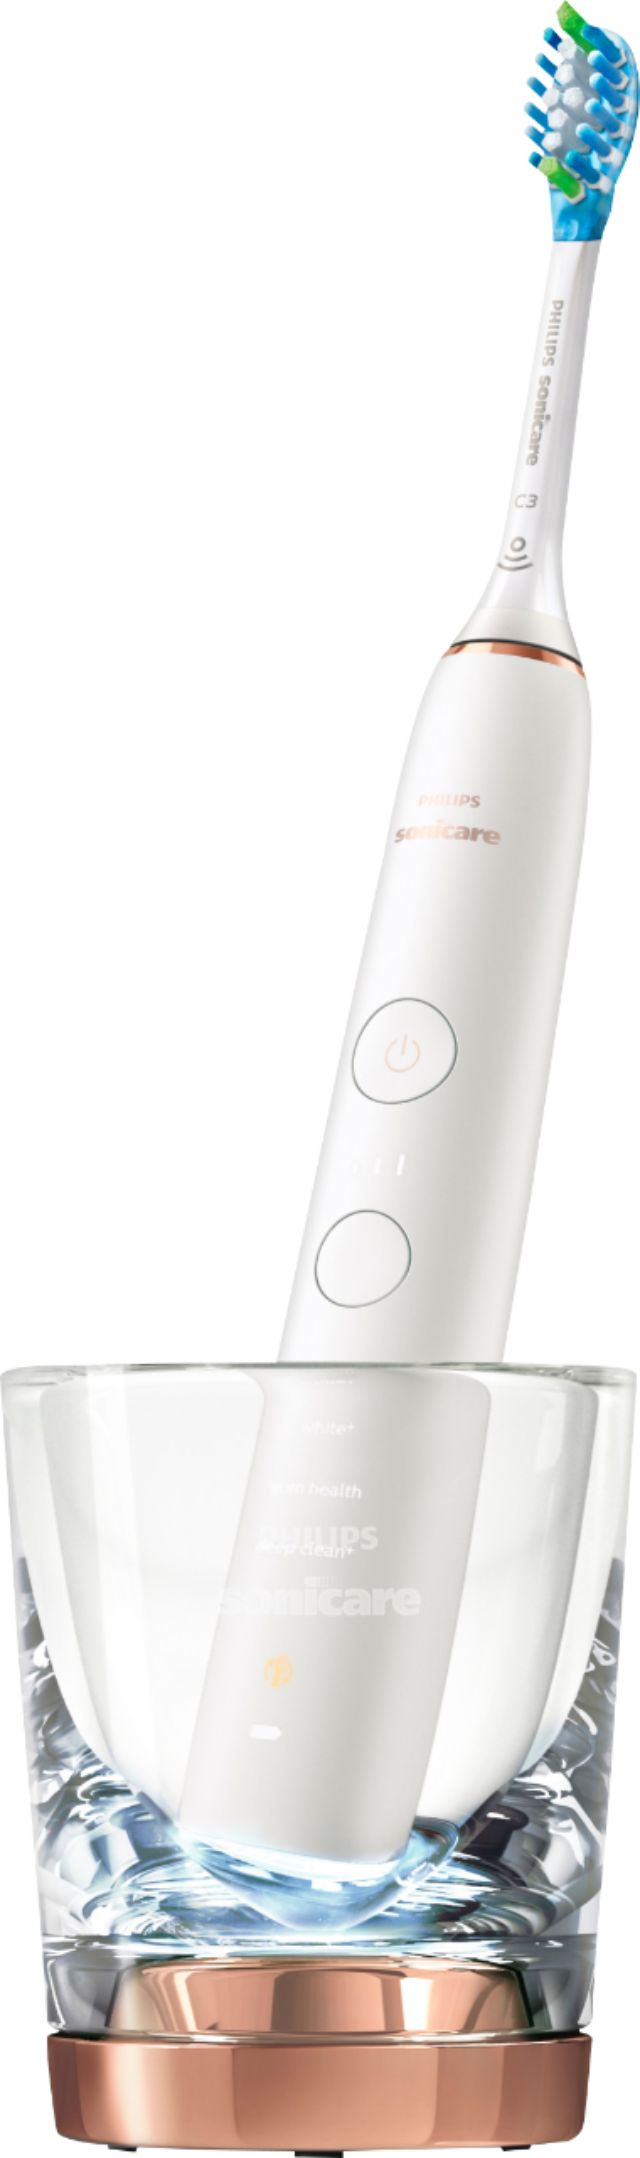 Left View: Philips Sonicare - DiamondClean Smart 9300 Rechargeable Toothbrush - Rose Gold